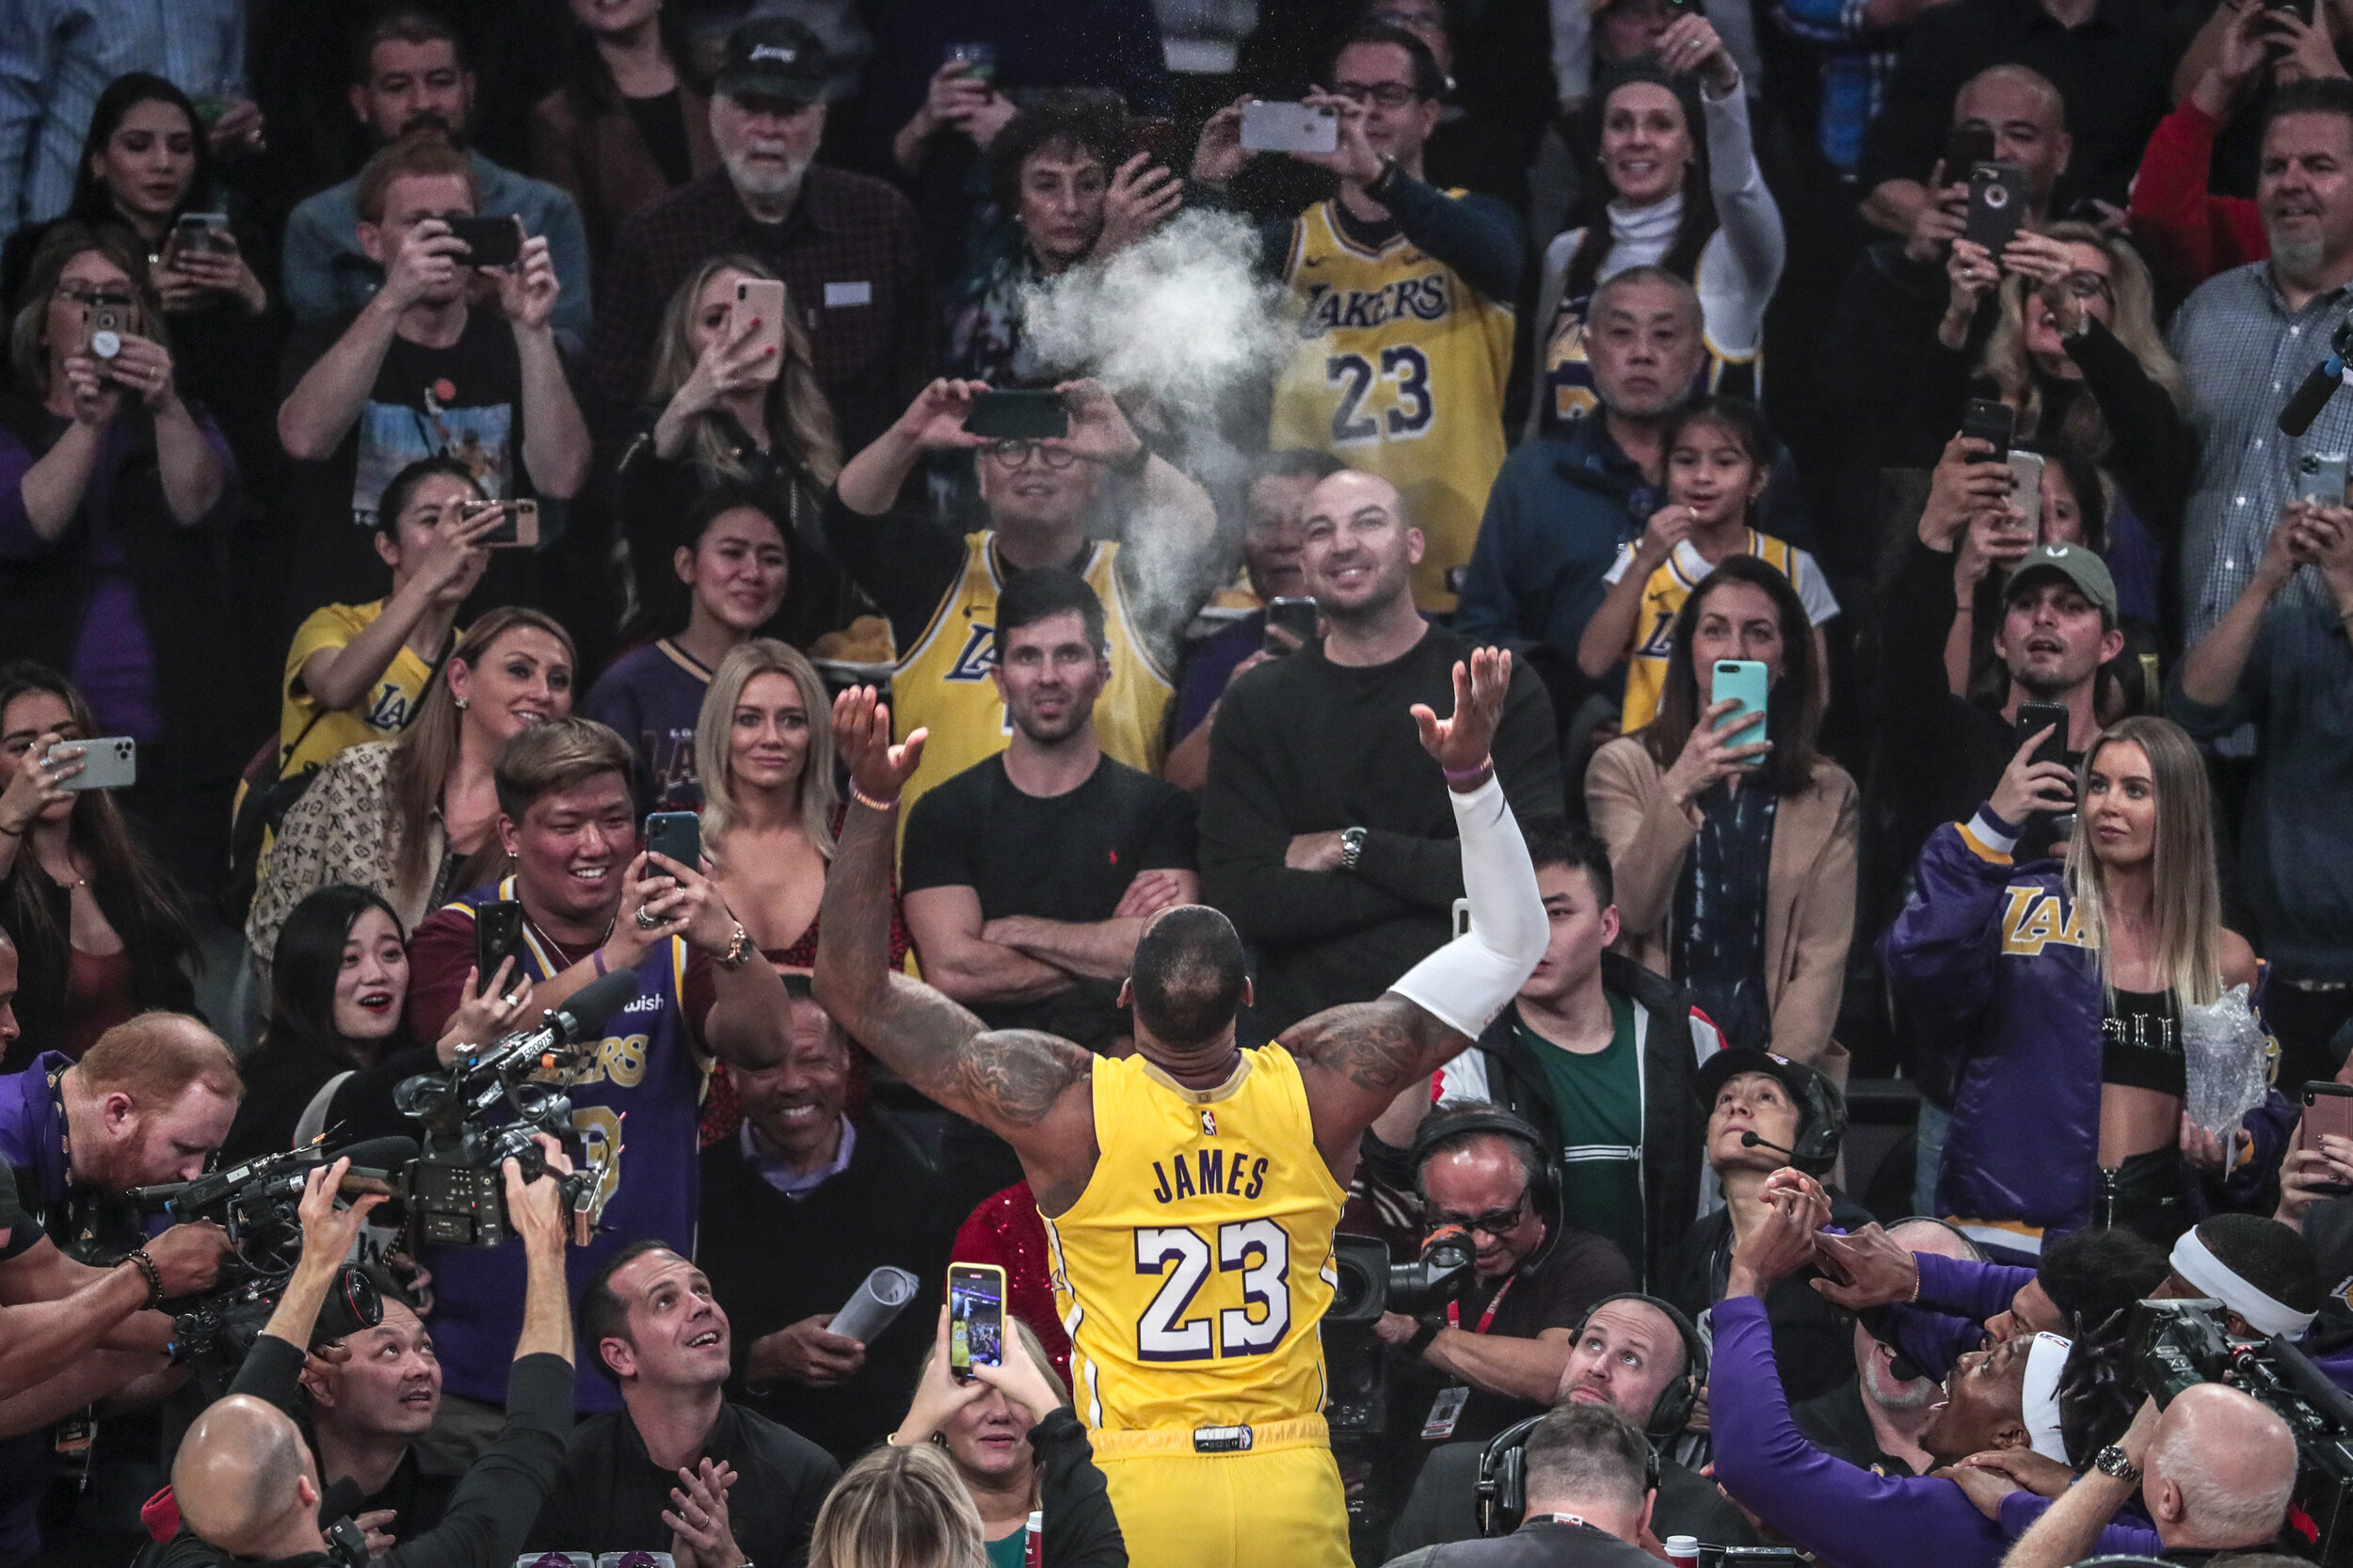  LOS ANGELES, CA, FRIDAY, JANUARY 3, 2020 - Los the New Orlea Angeles Lakers guard LeBron James flips powder in the air during a pre-game ritual in front of rapt fans before a game against the New Orleans Pelicans at Staples Center.   